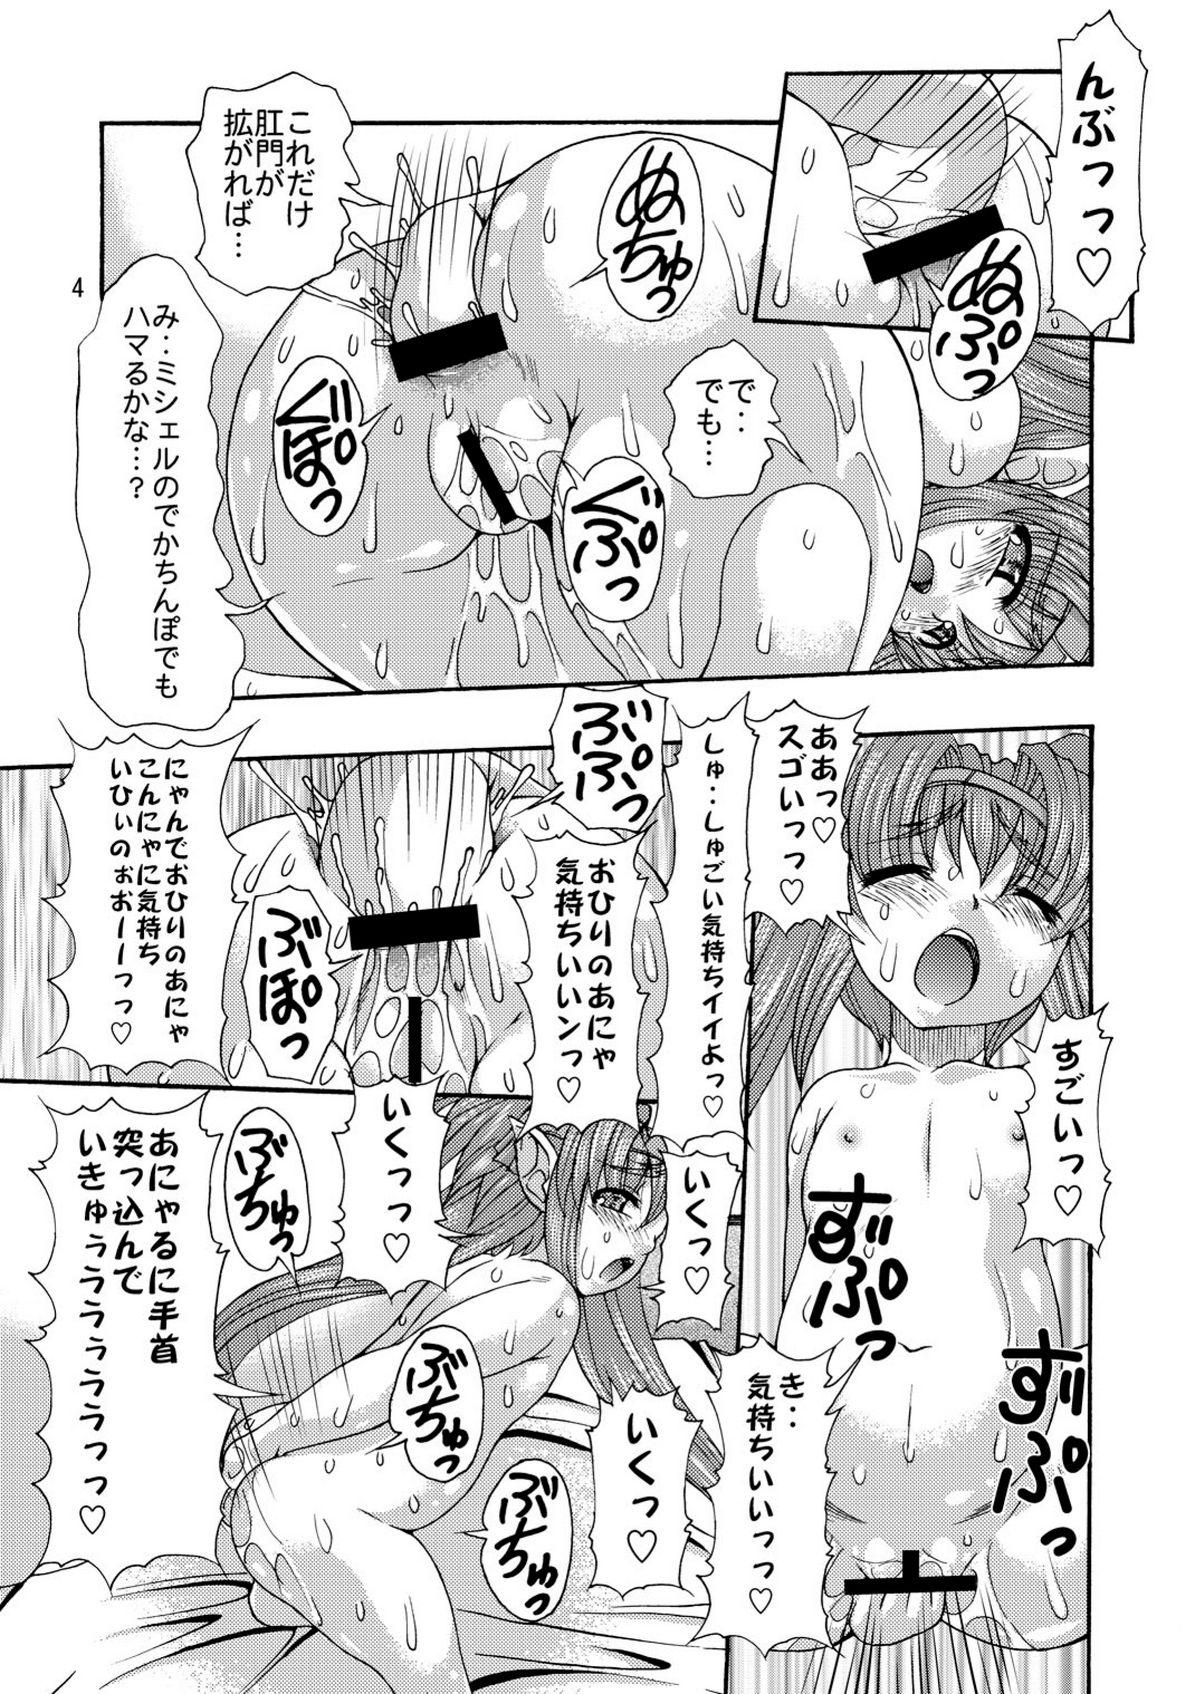 Black Woman Muchipuni Paradise! - Macross frontier Tied - Page 4